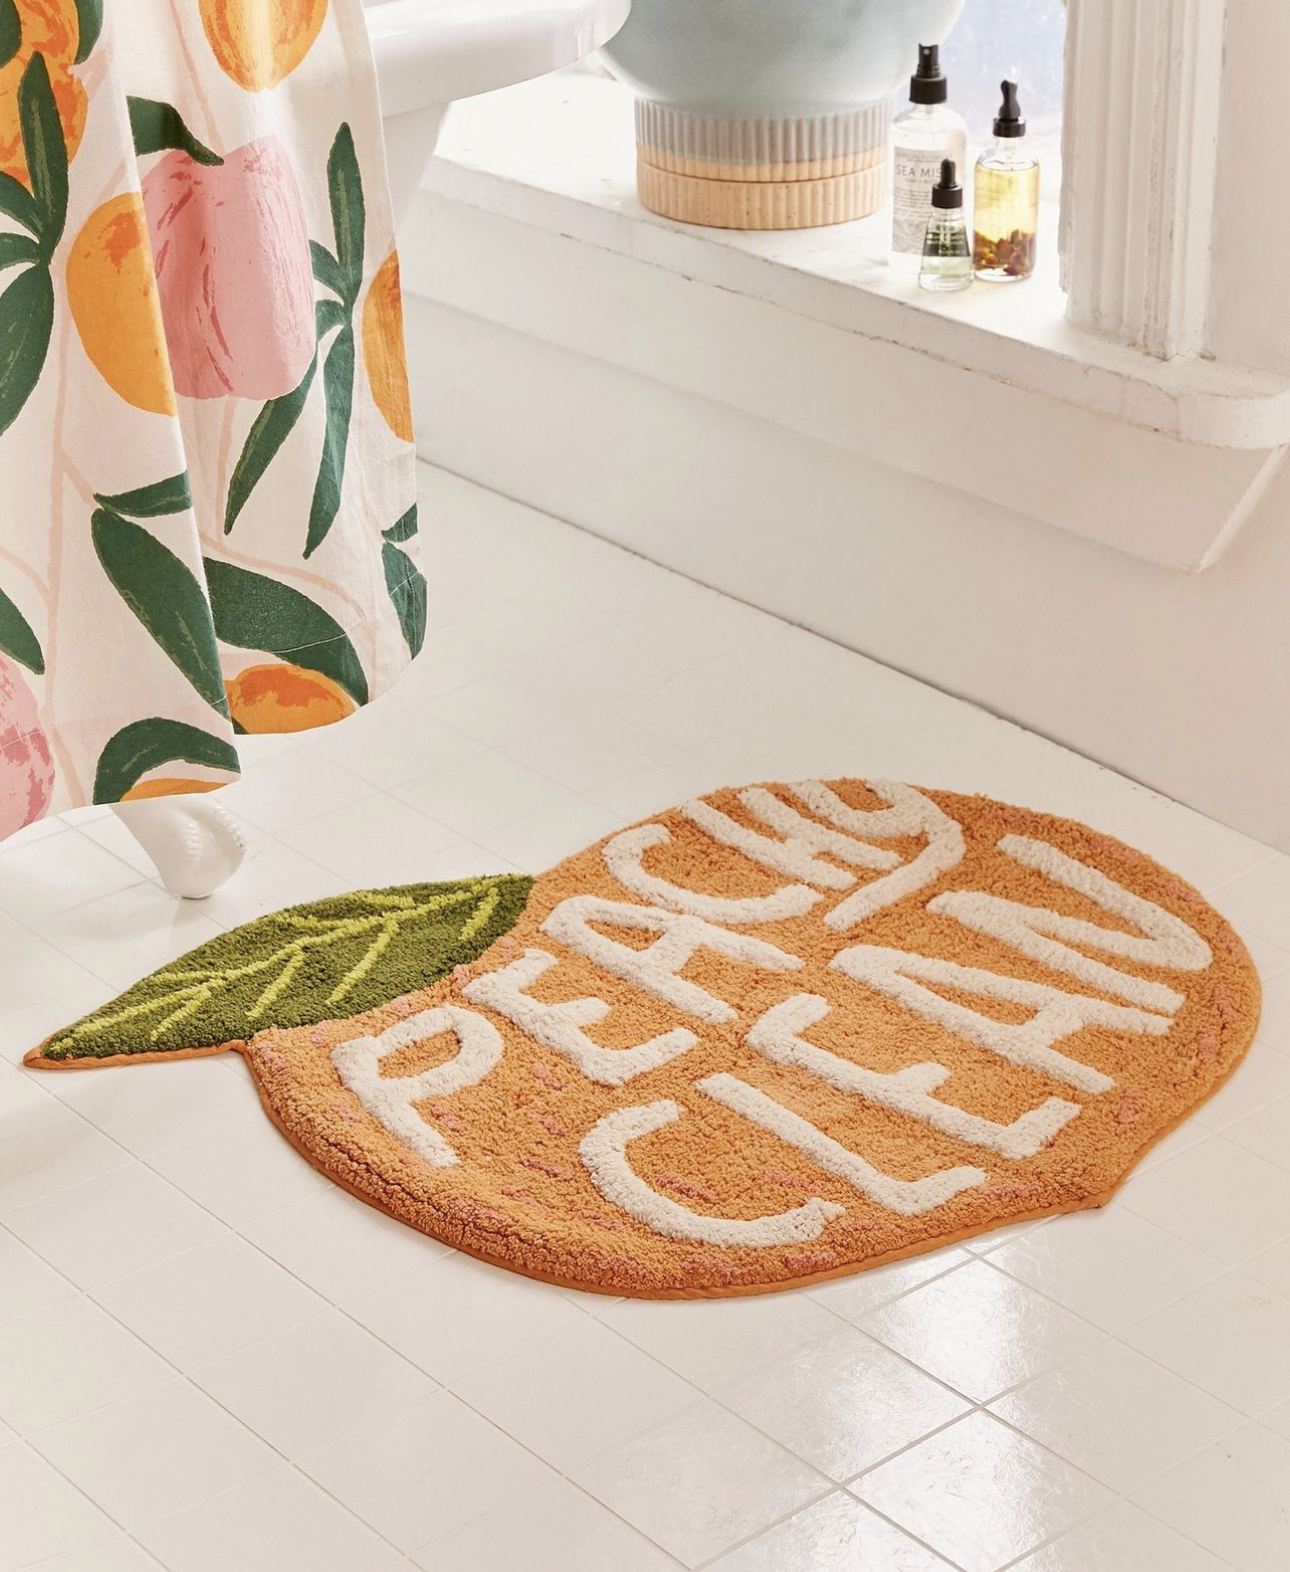 A bathroom rug in a peach design from Urban Outfitters